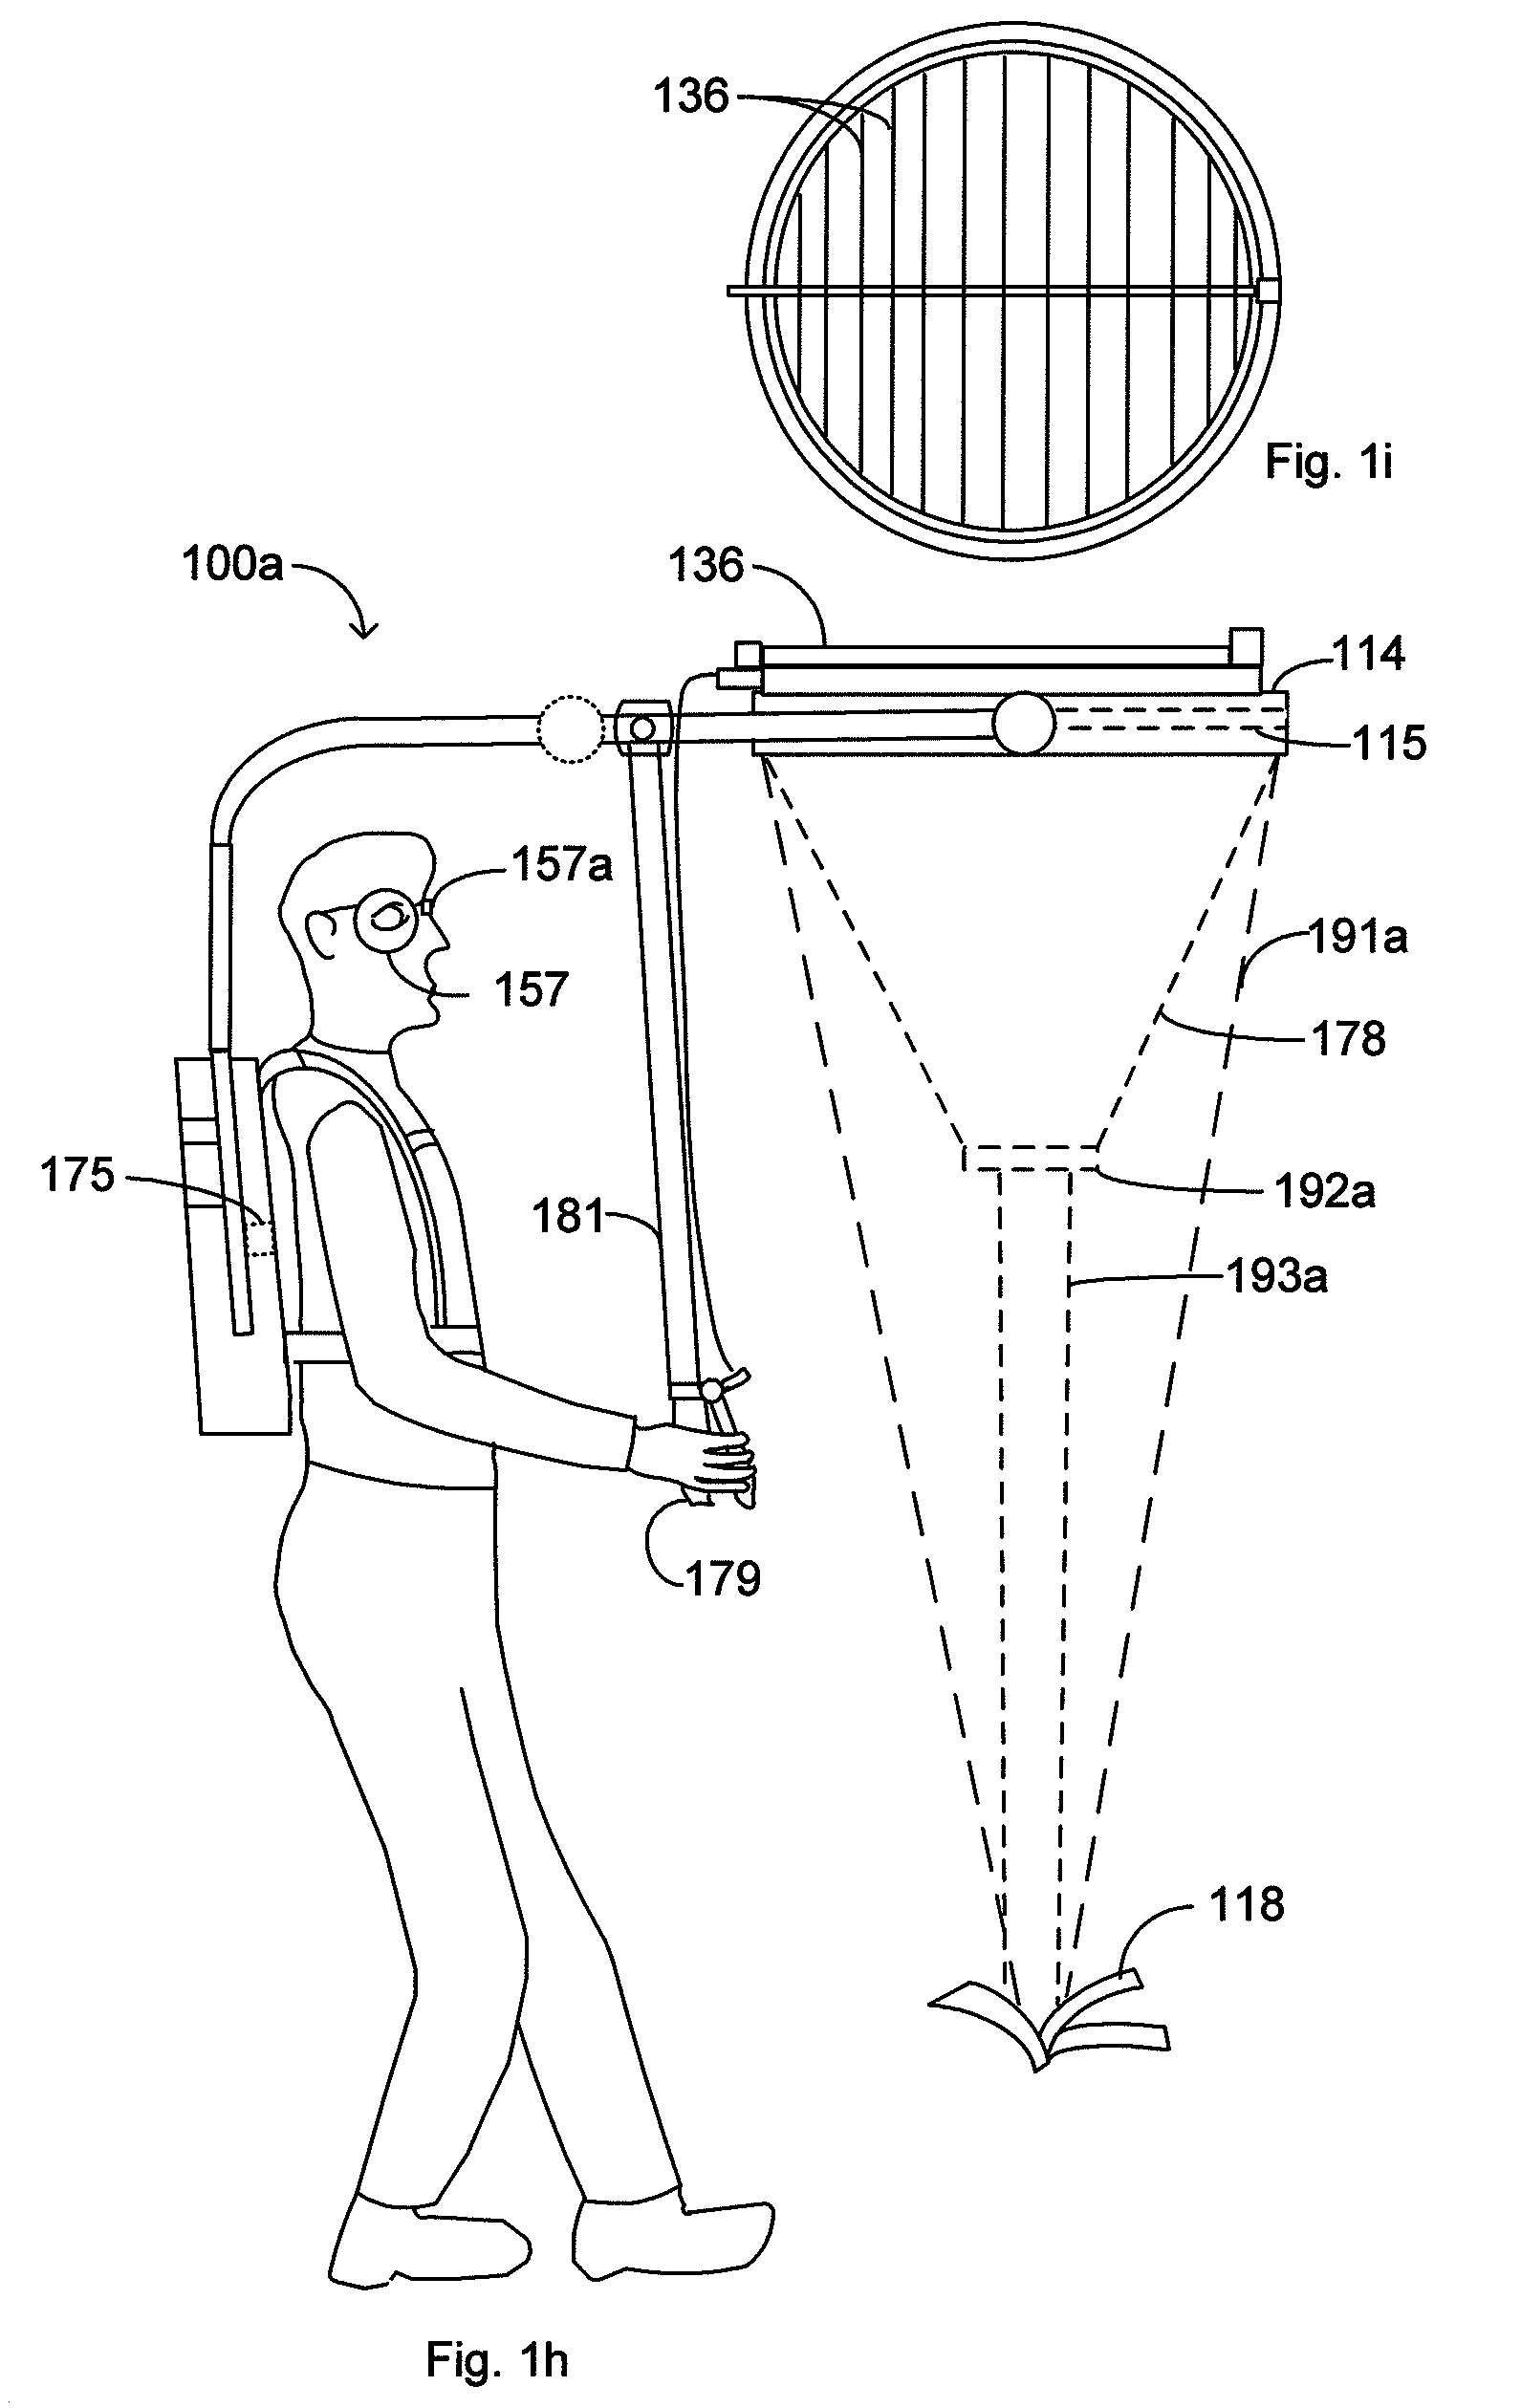 Method and Apparatus for Controlling Weeds with Solar Energy